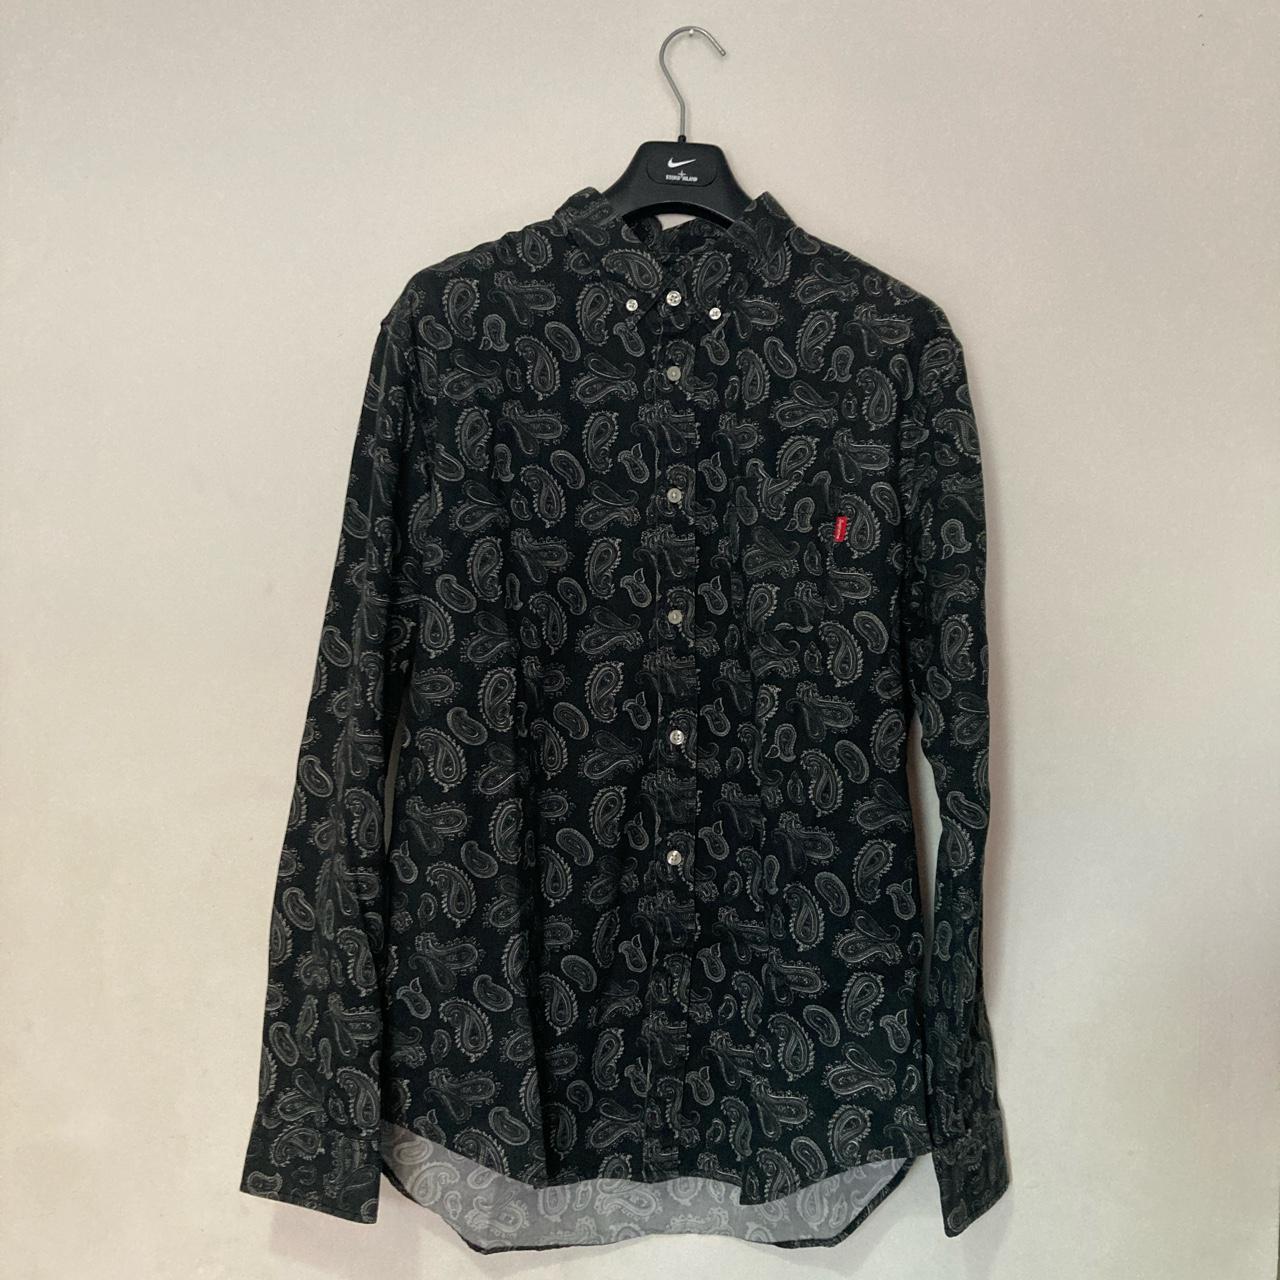 Supreme Paisley Shirt, From 2013 if I remember...